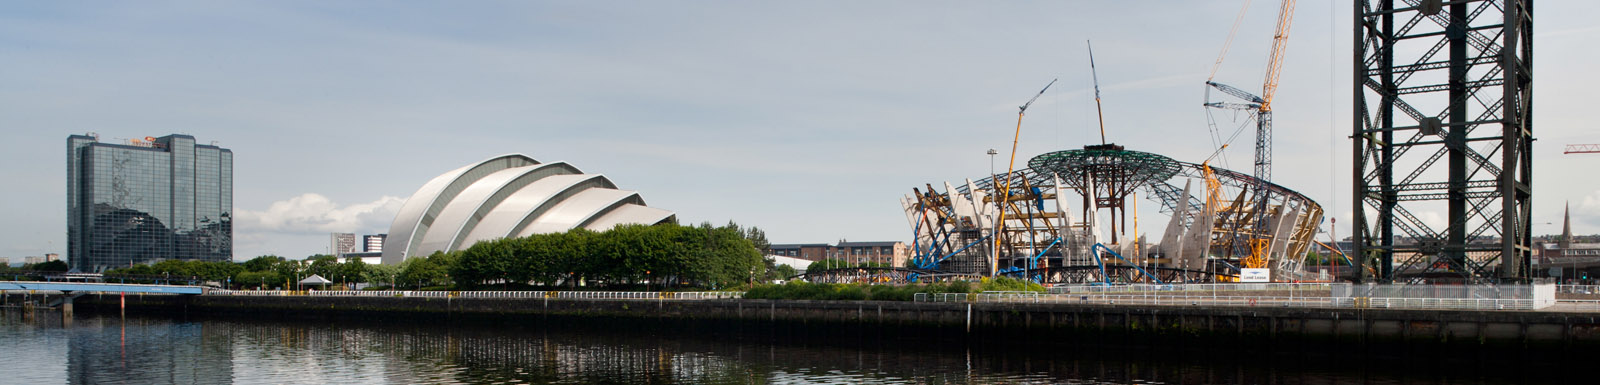 View showing construction of the new SSE Hydro